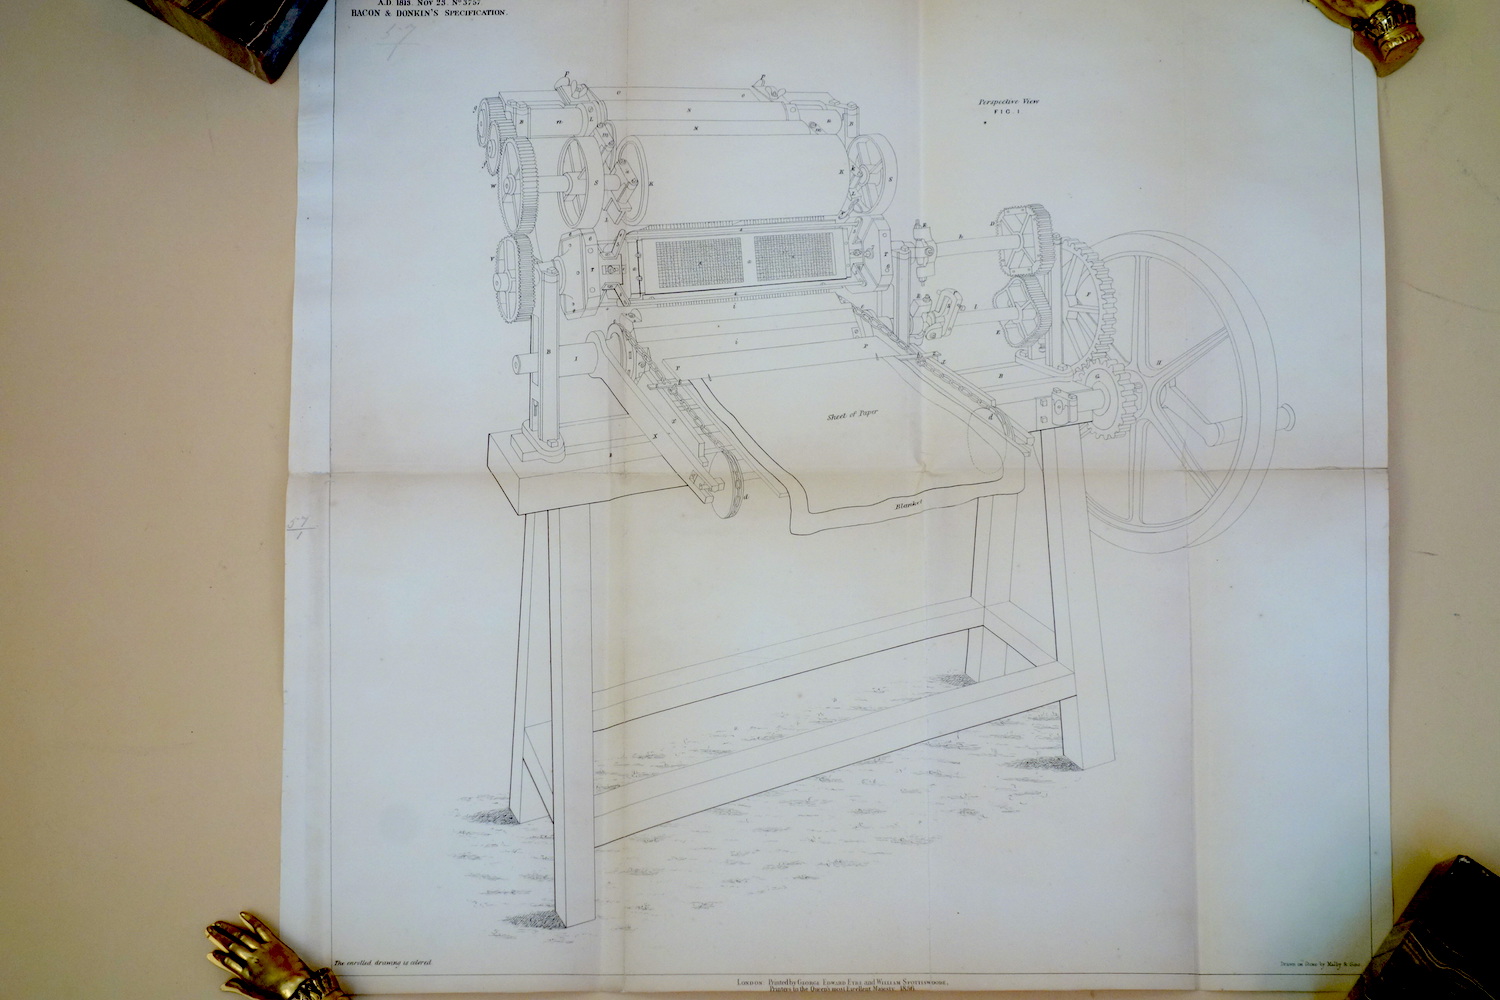 An unusally complete perspective view of the Bacon & Donkin rotary press from their patent